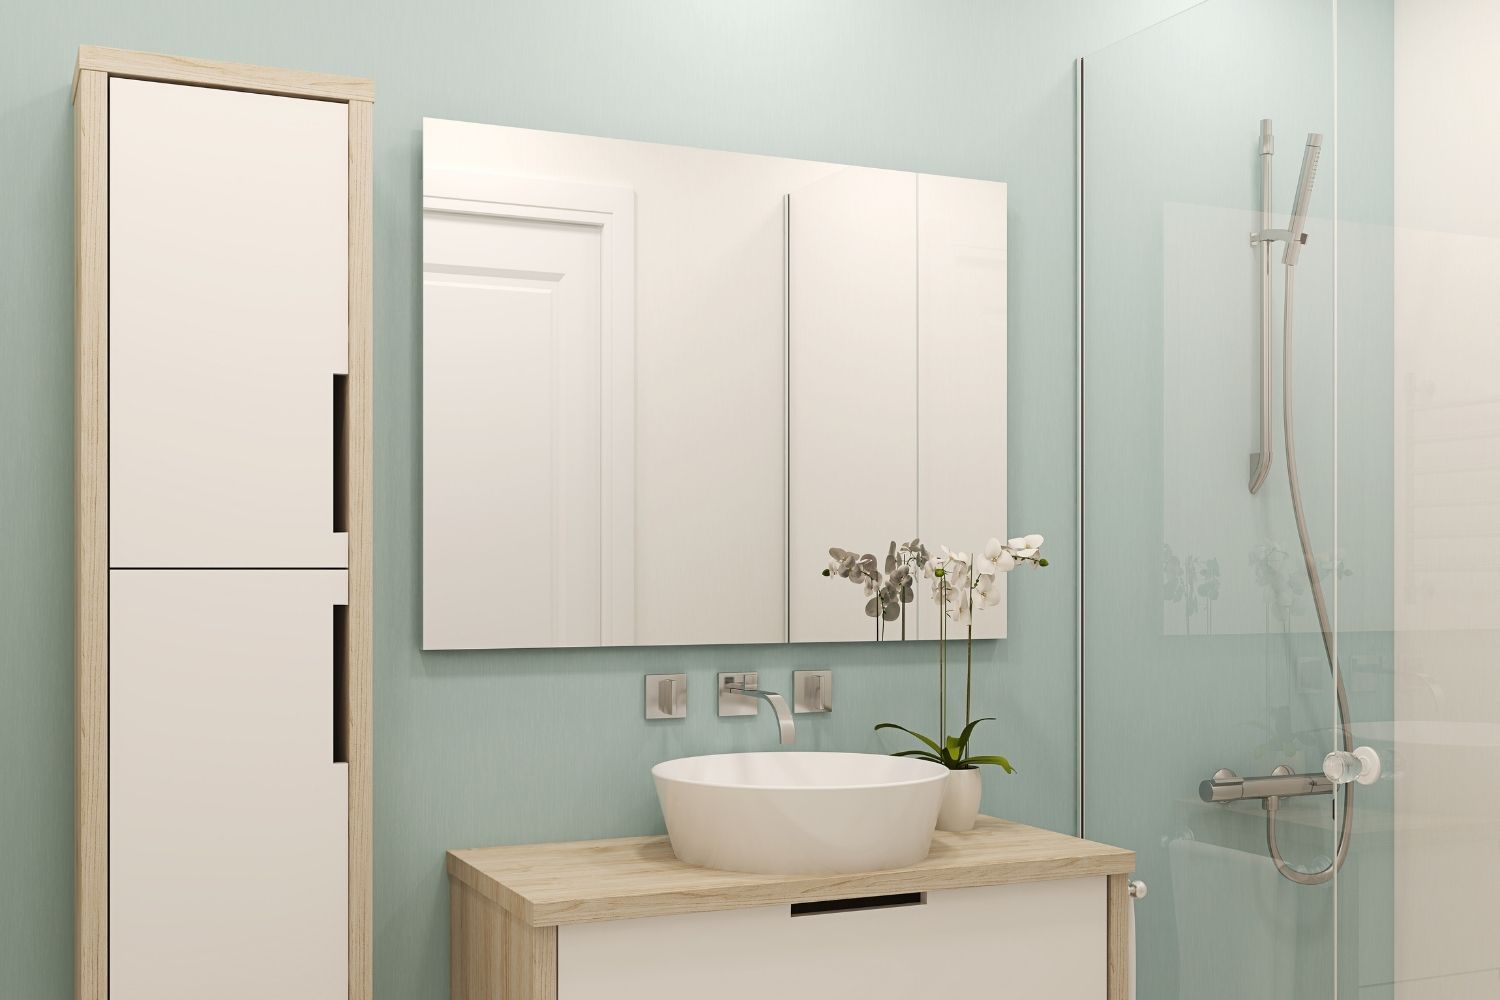 Best Paint Colors For Small Bathrooms, Small Bathroom Paint Colors 2021 Benjamin Moore